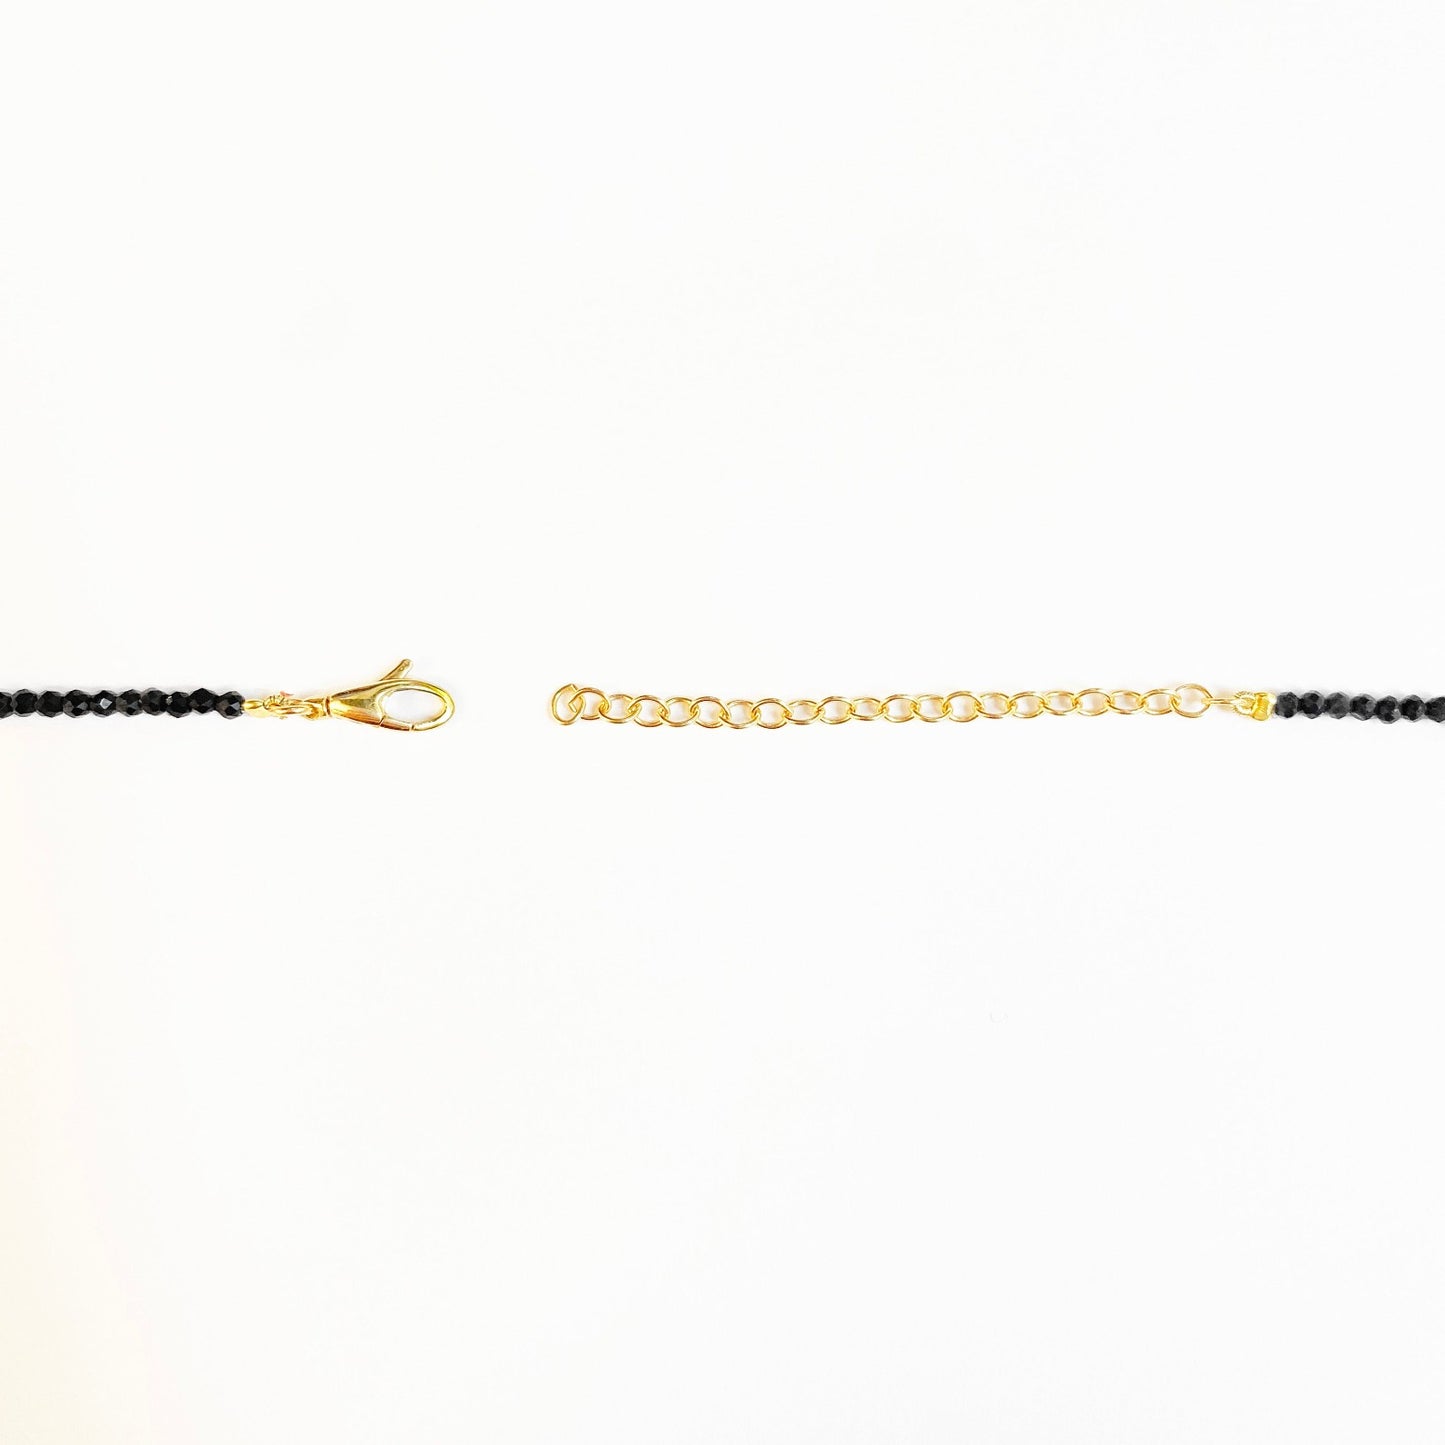 Shimmering beaded necklace made of 2.5mm faceted opals in shades of black on a gold linking lobster clasp.